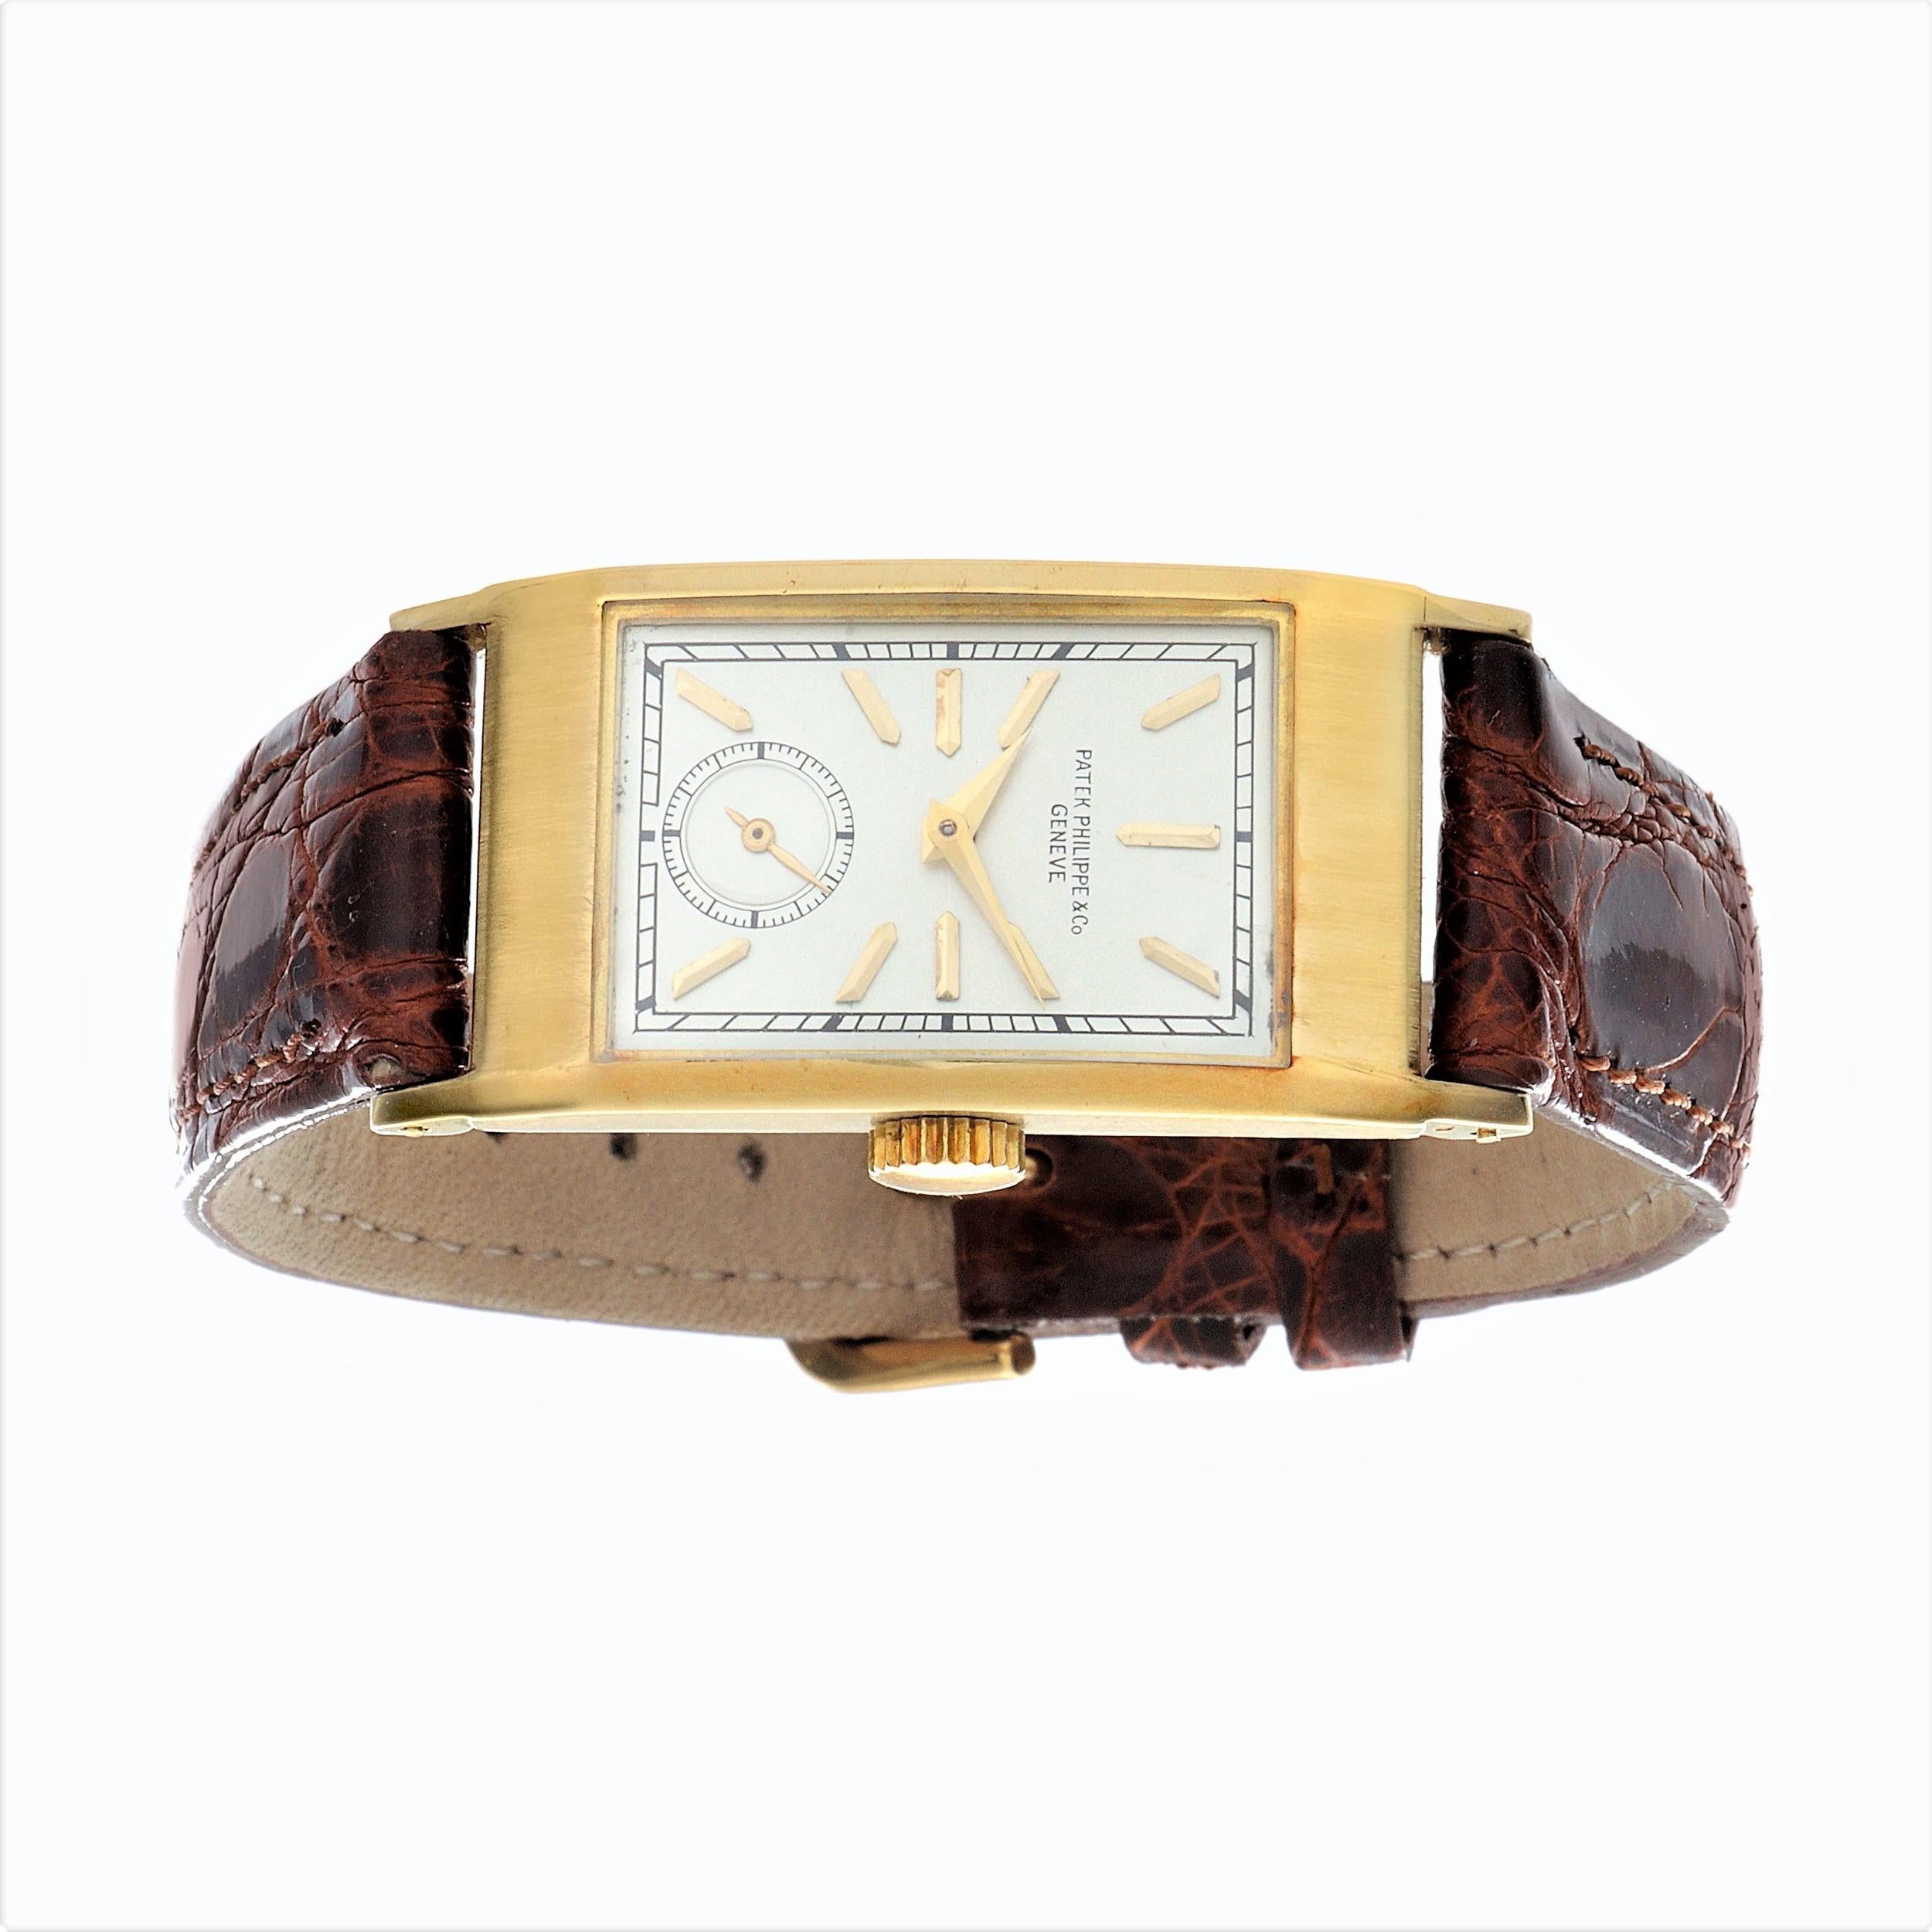 Introduction:
Patek Philippe 425J Tegolino Art Deco watch, measuring 42.5 x 20.5.  The watch is fitted with a 9